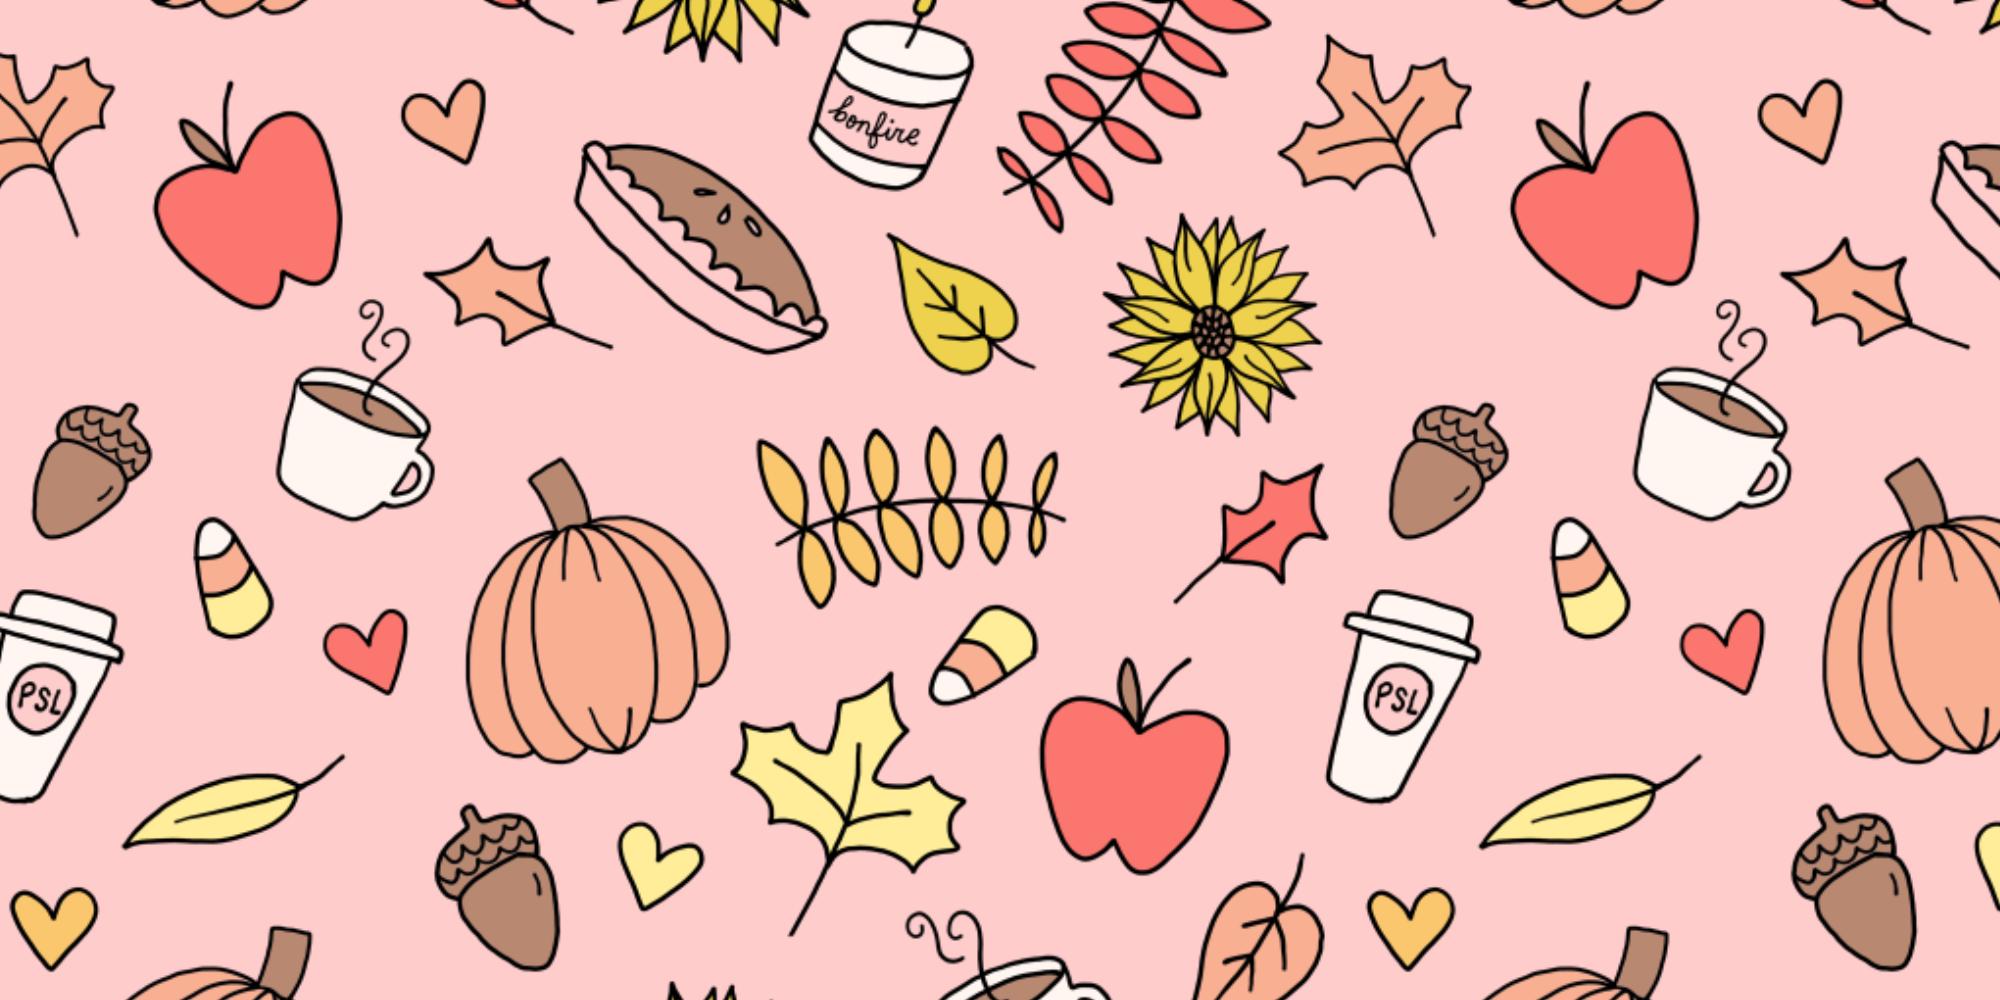 Kate Gabrielle over to my patreon to get free desktop and phone wallpaper featuring this cute autumnal pattern!